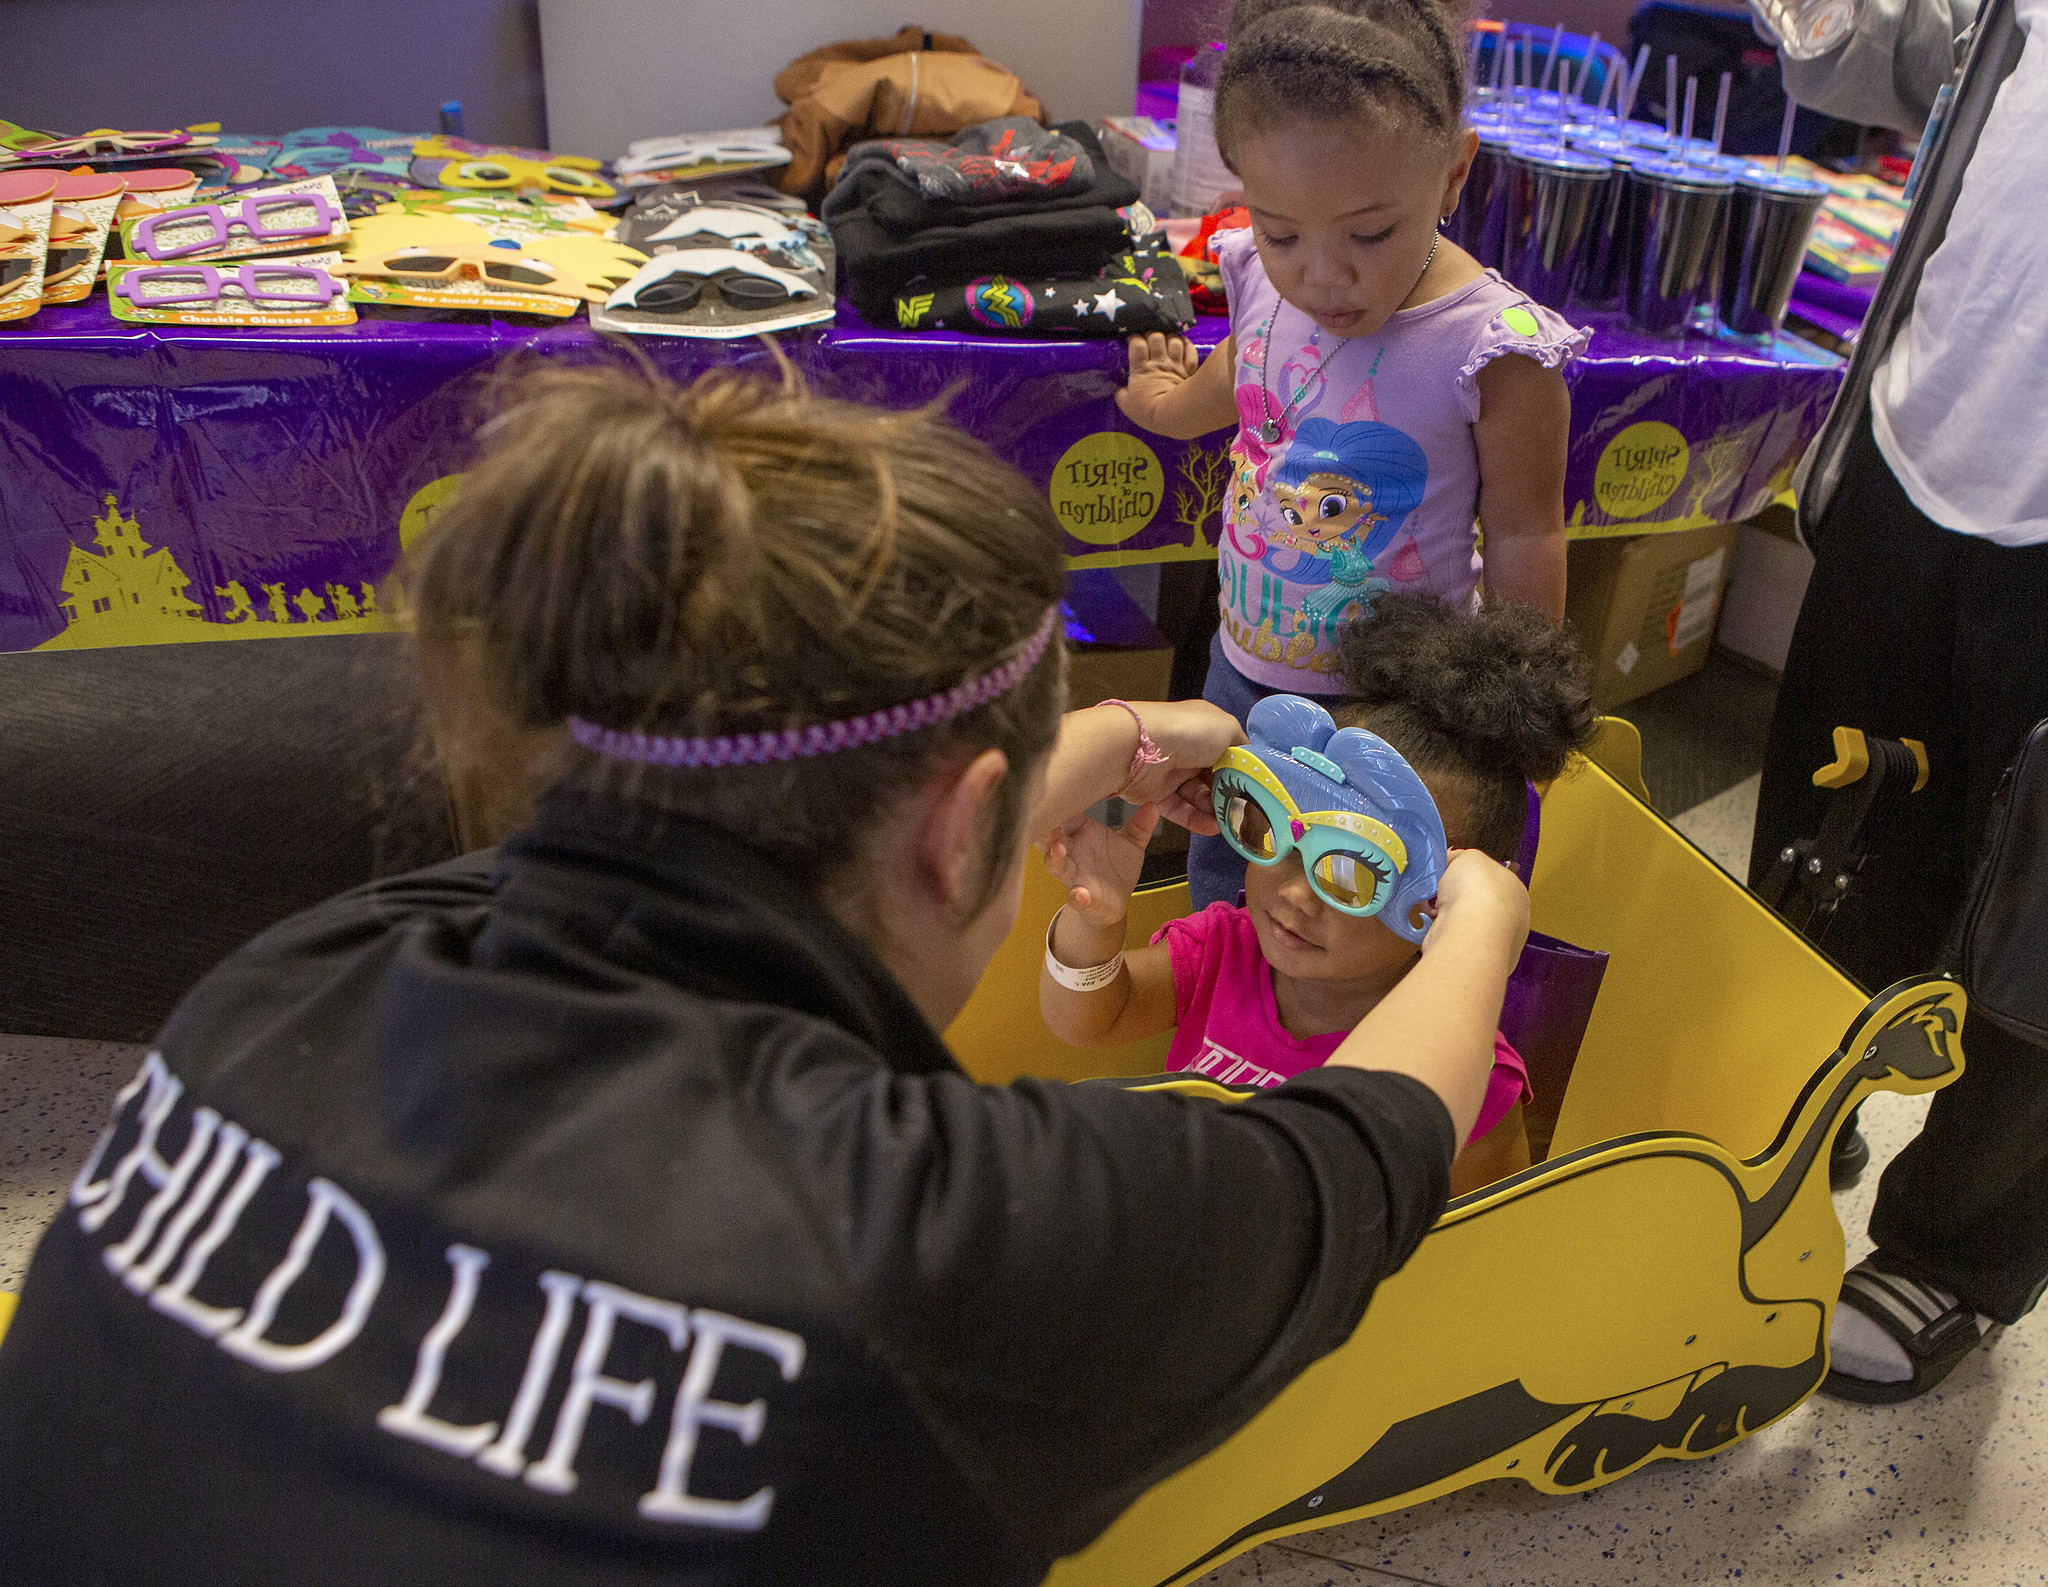 Child Life Assistant Tiffaney Horner places special glasses on the face of 2-year-old Ava Lawson as her sister Aurora, 3, looks on. Ava is seated in a toy car. In the near background is a table with sunglasses, shirts, cups and other merchandise on it.